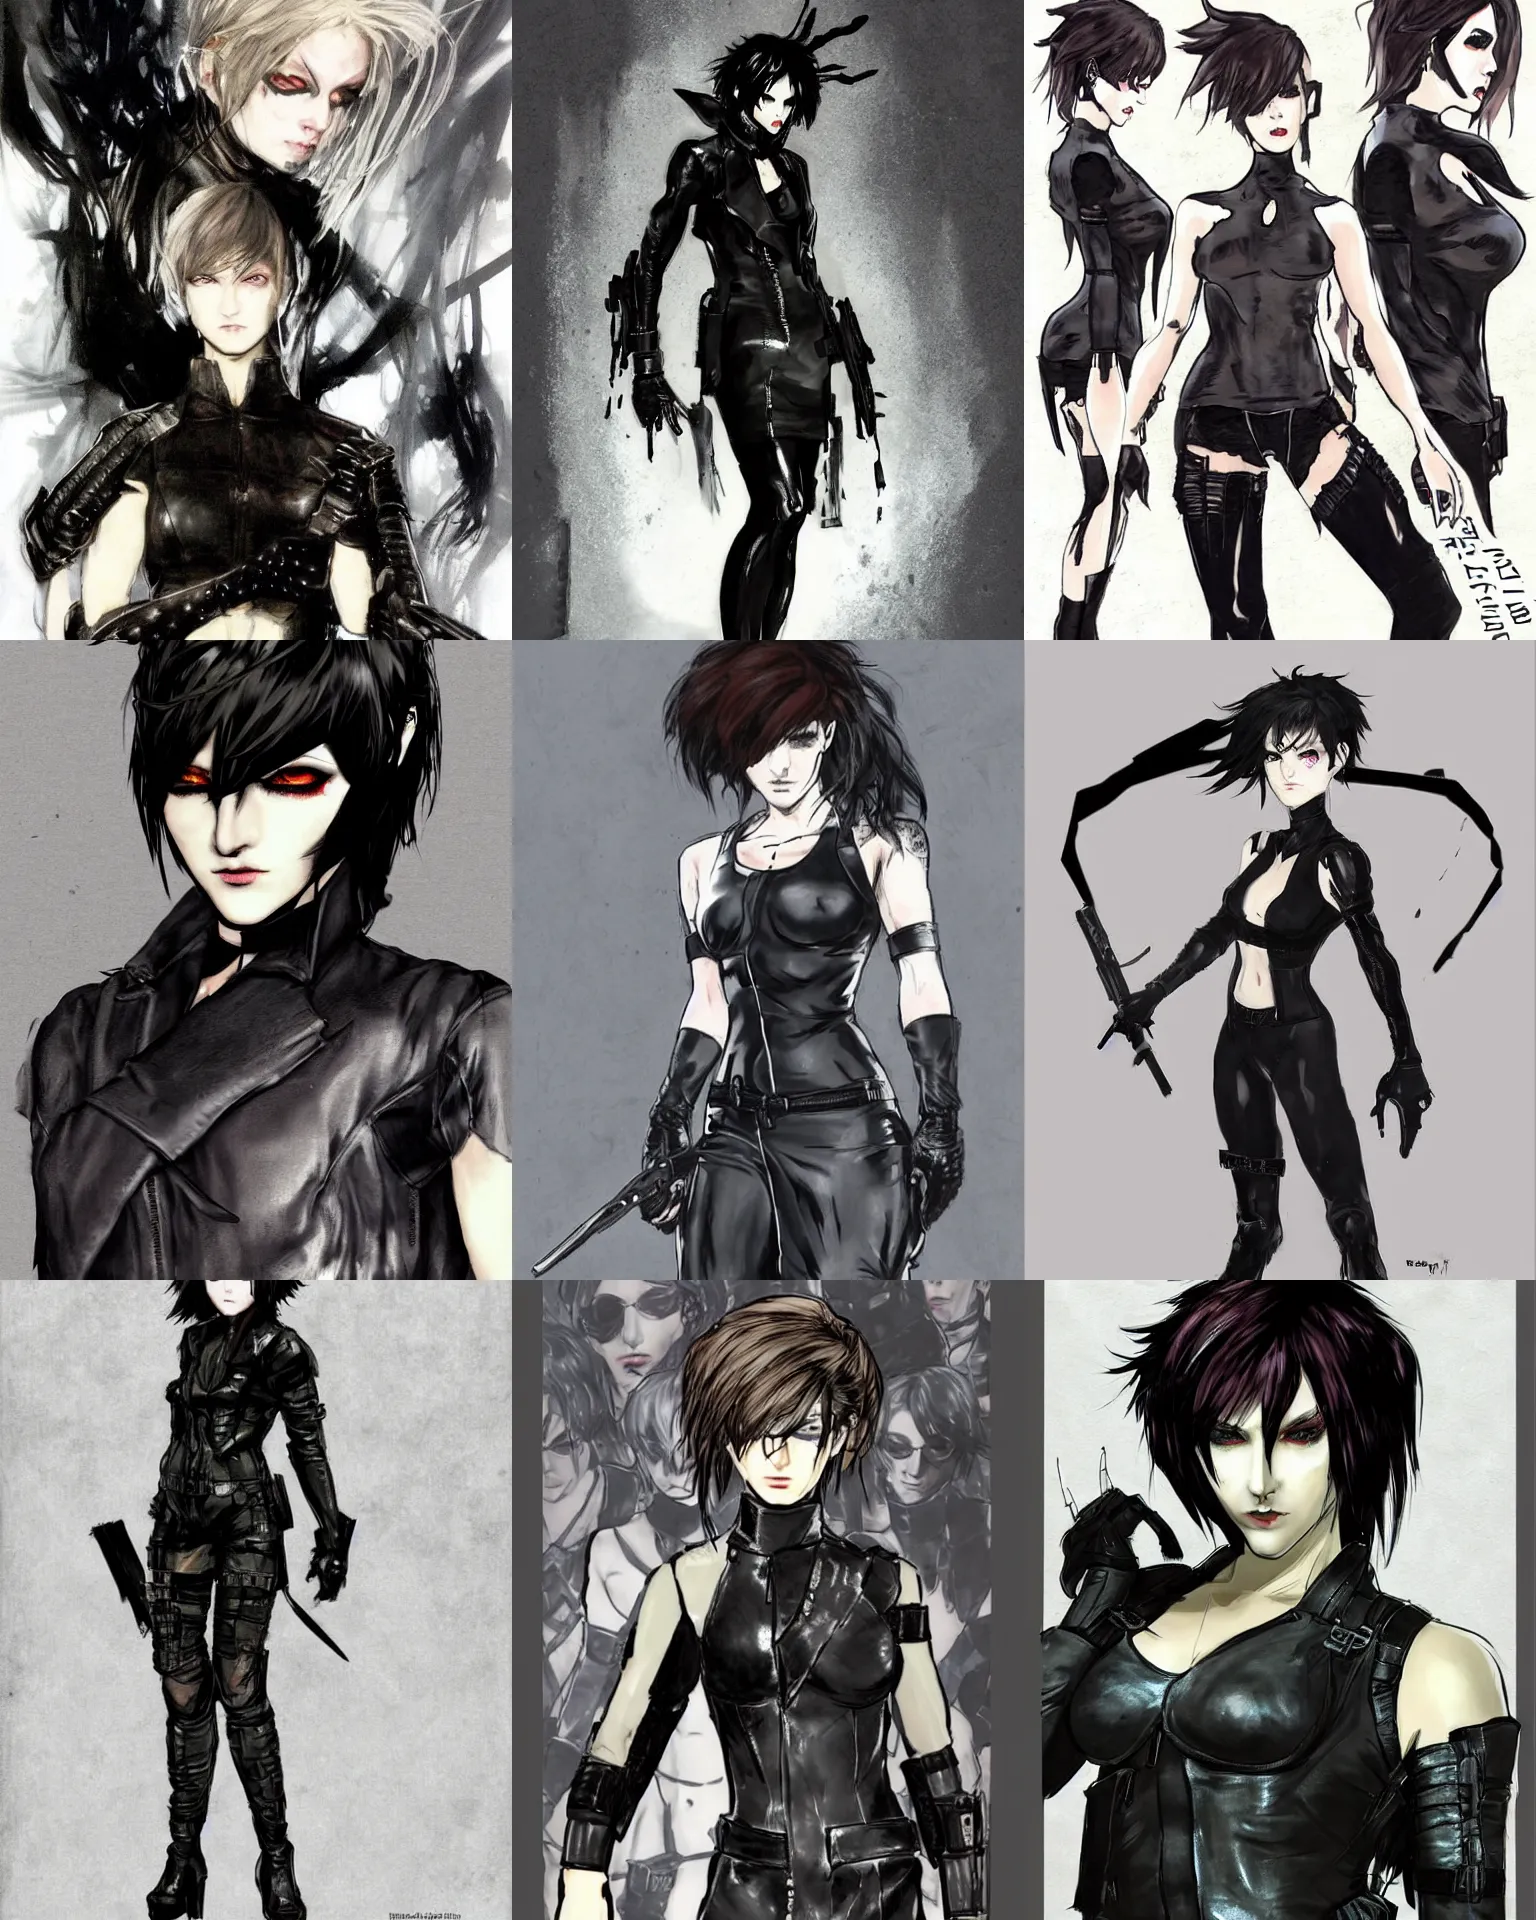 Prompt: goth Metal Gear Solid character concept art. Her hair is dark brown and cut into a short, messy pixie cut. She has a slightly rounded face, with a pointed chin, large entirely-black eyes, and a small nose. She is wearing a black tank top, a black leather jacket, a black knee-length skirt, a black choker, and black leather boots.